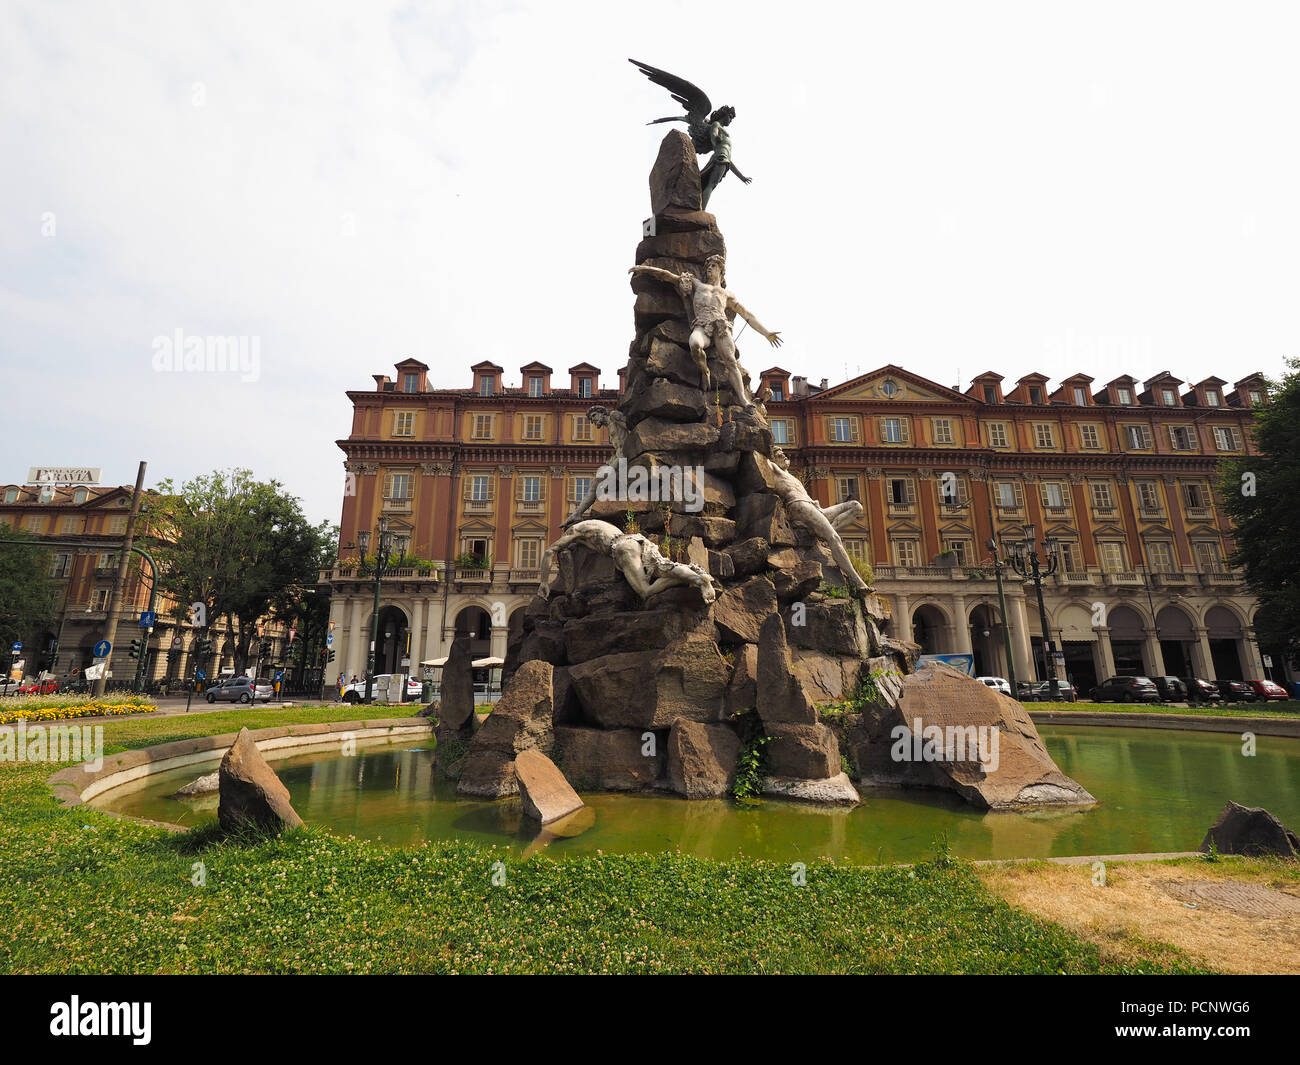 TURIN, ITALY - CIRCA JULY 2018: Frejus Tunnel Monument in Piazza Statuto Stock Photo